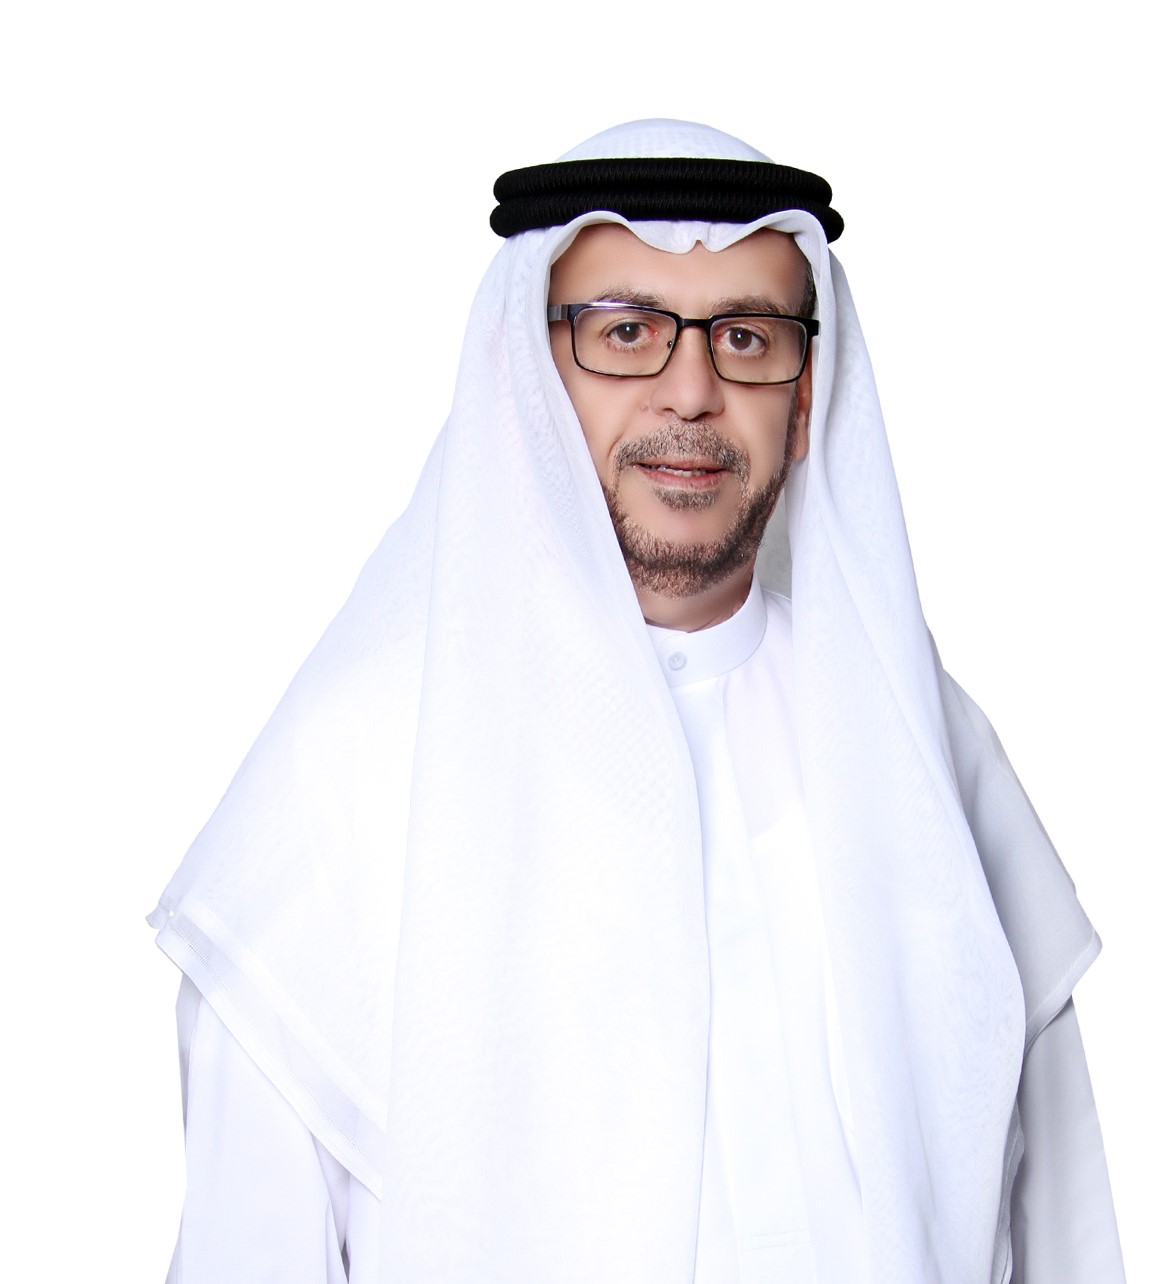 Abdullah Al Muwaiji: We are Proud of the Pioneering Role of Emirati Women in the Journey of Our Developmental Renaissance